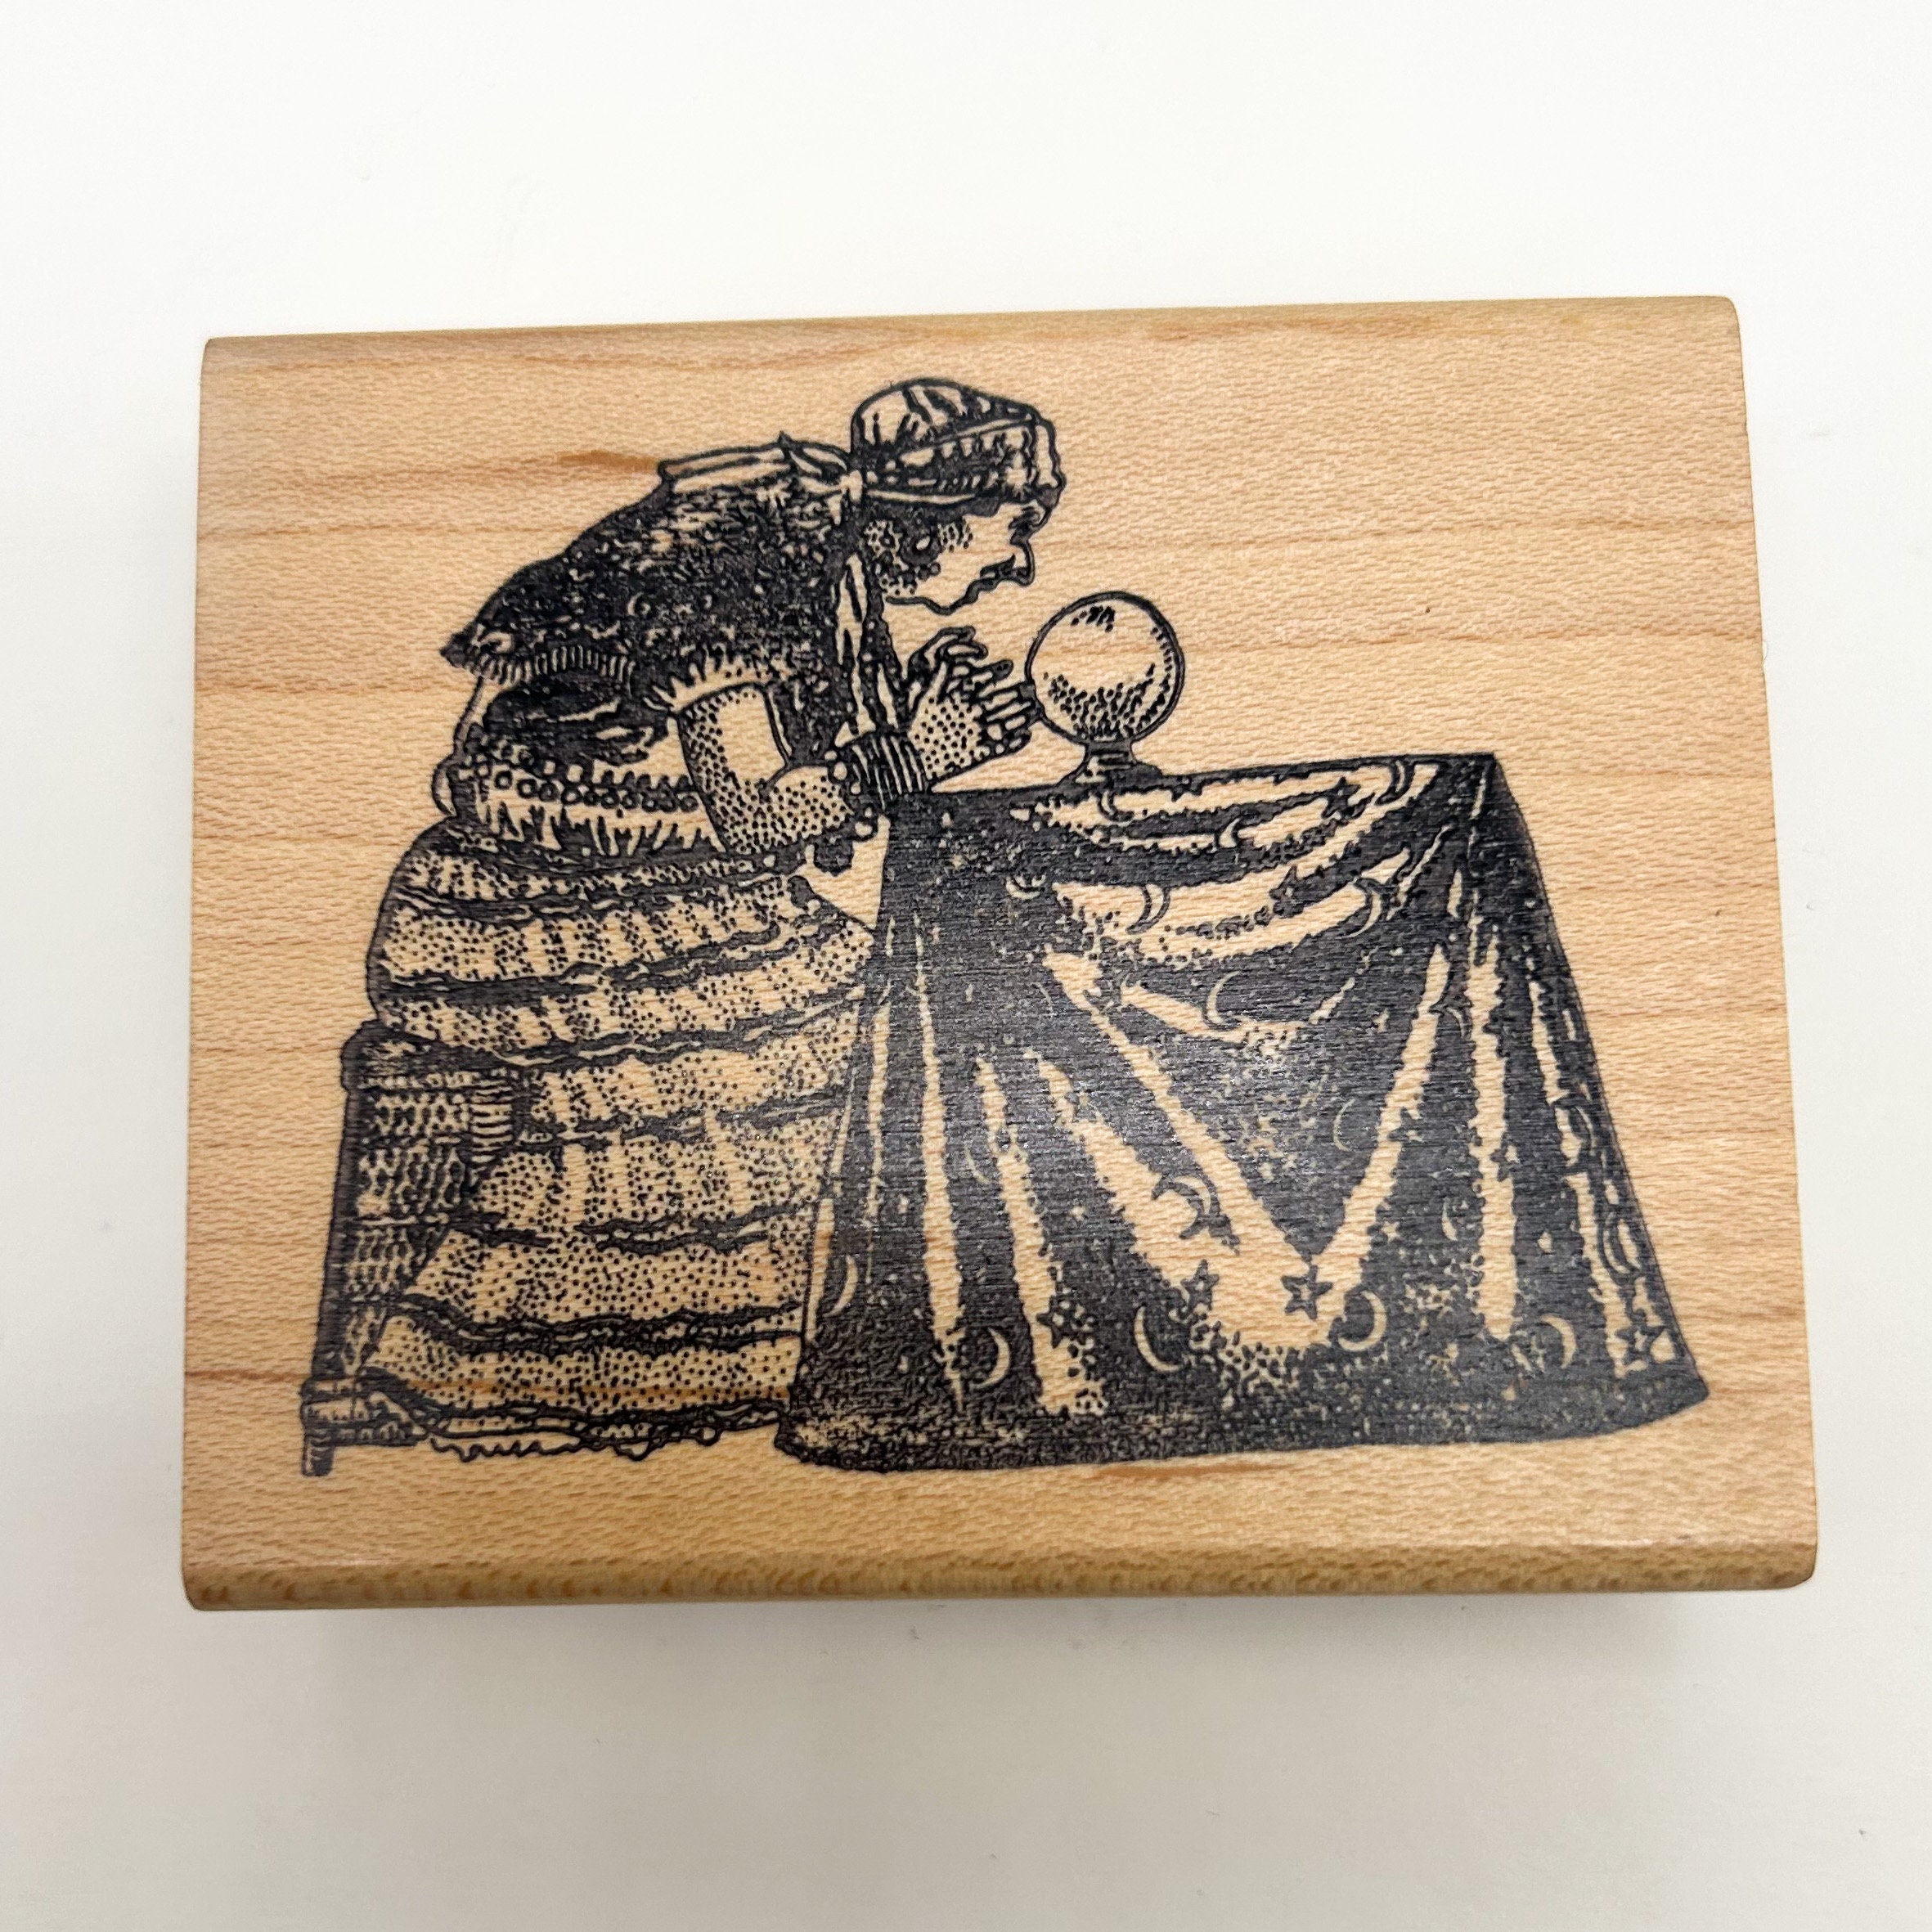 The High Priestess Tarot Card Rubber Stamp for Stamping Crafting Planners